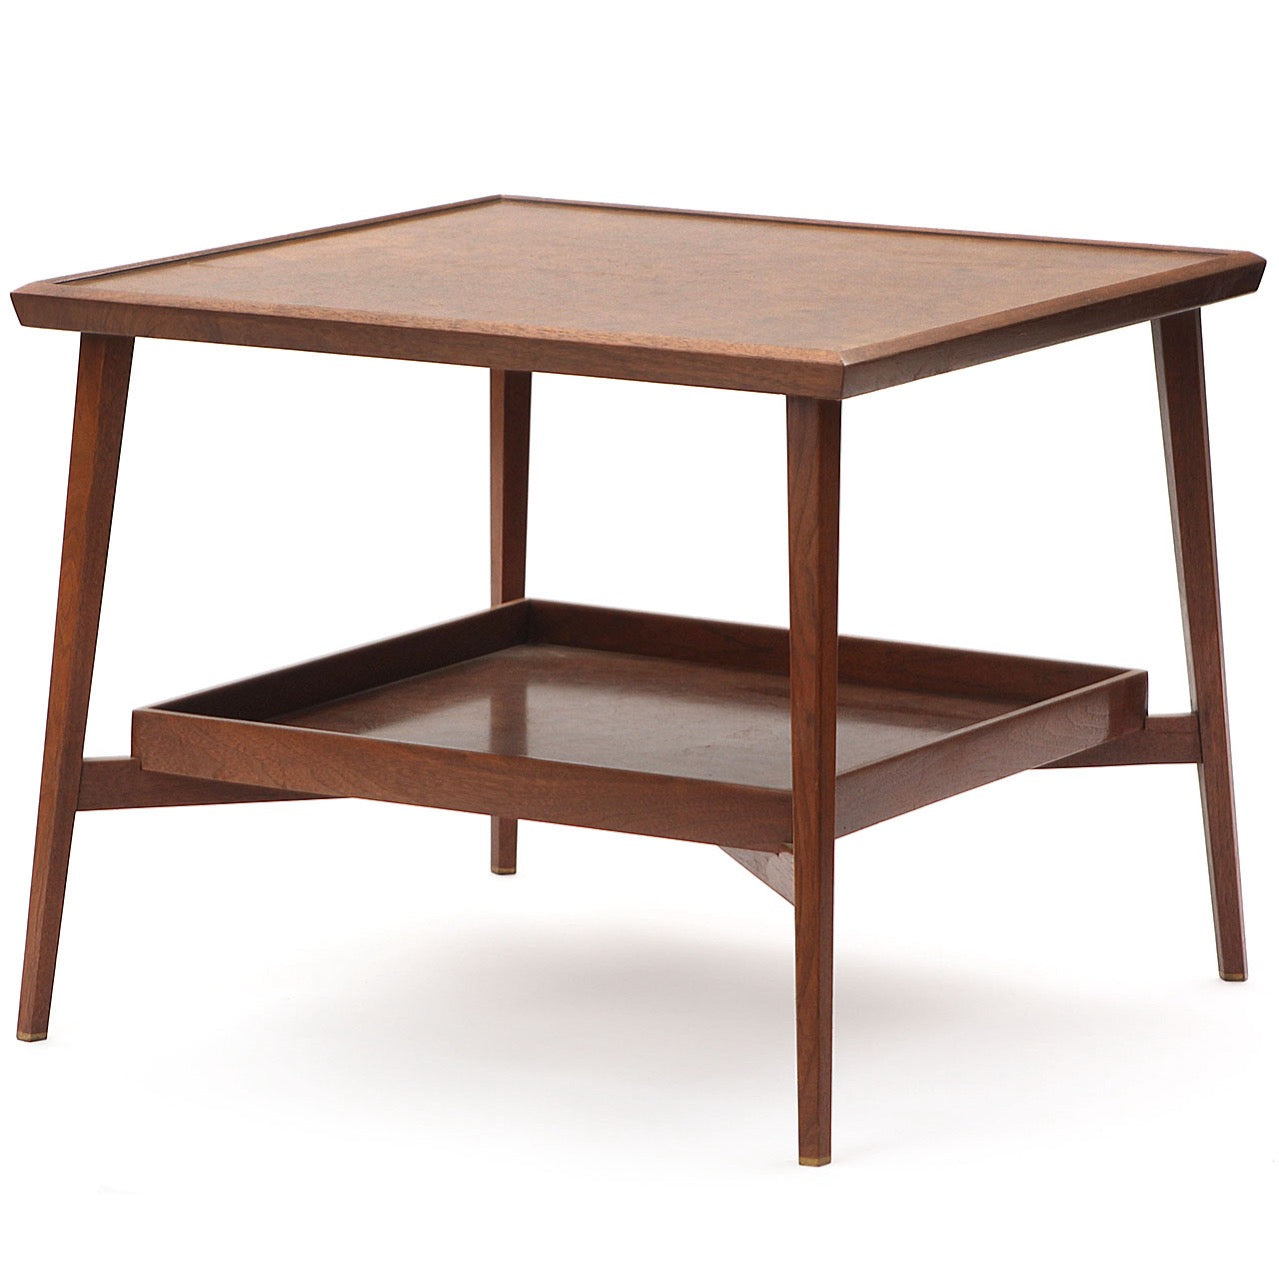 Tapered Leg Table by Edward Wormley for Dunbar